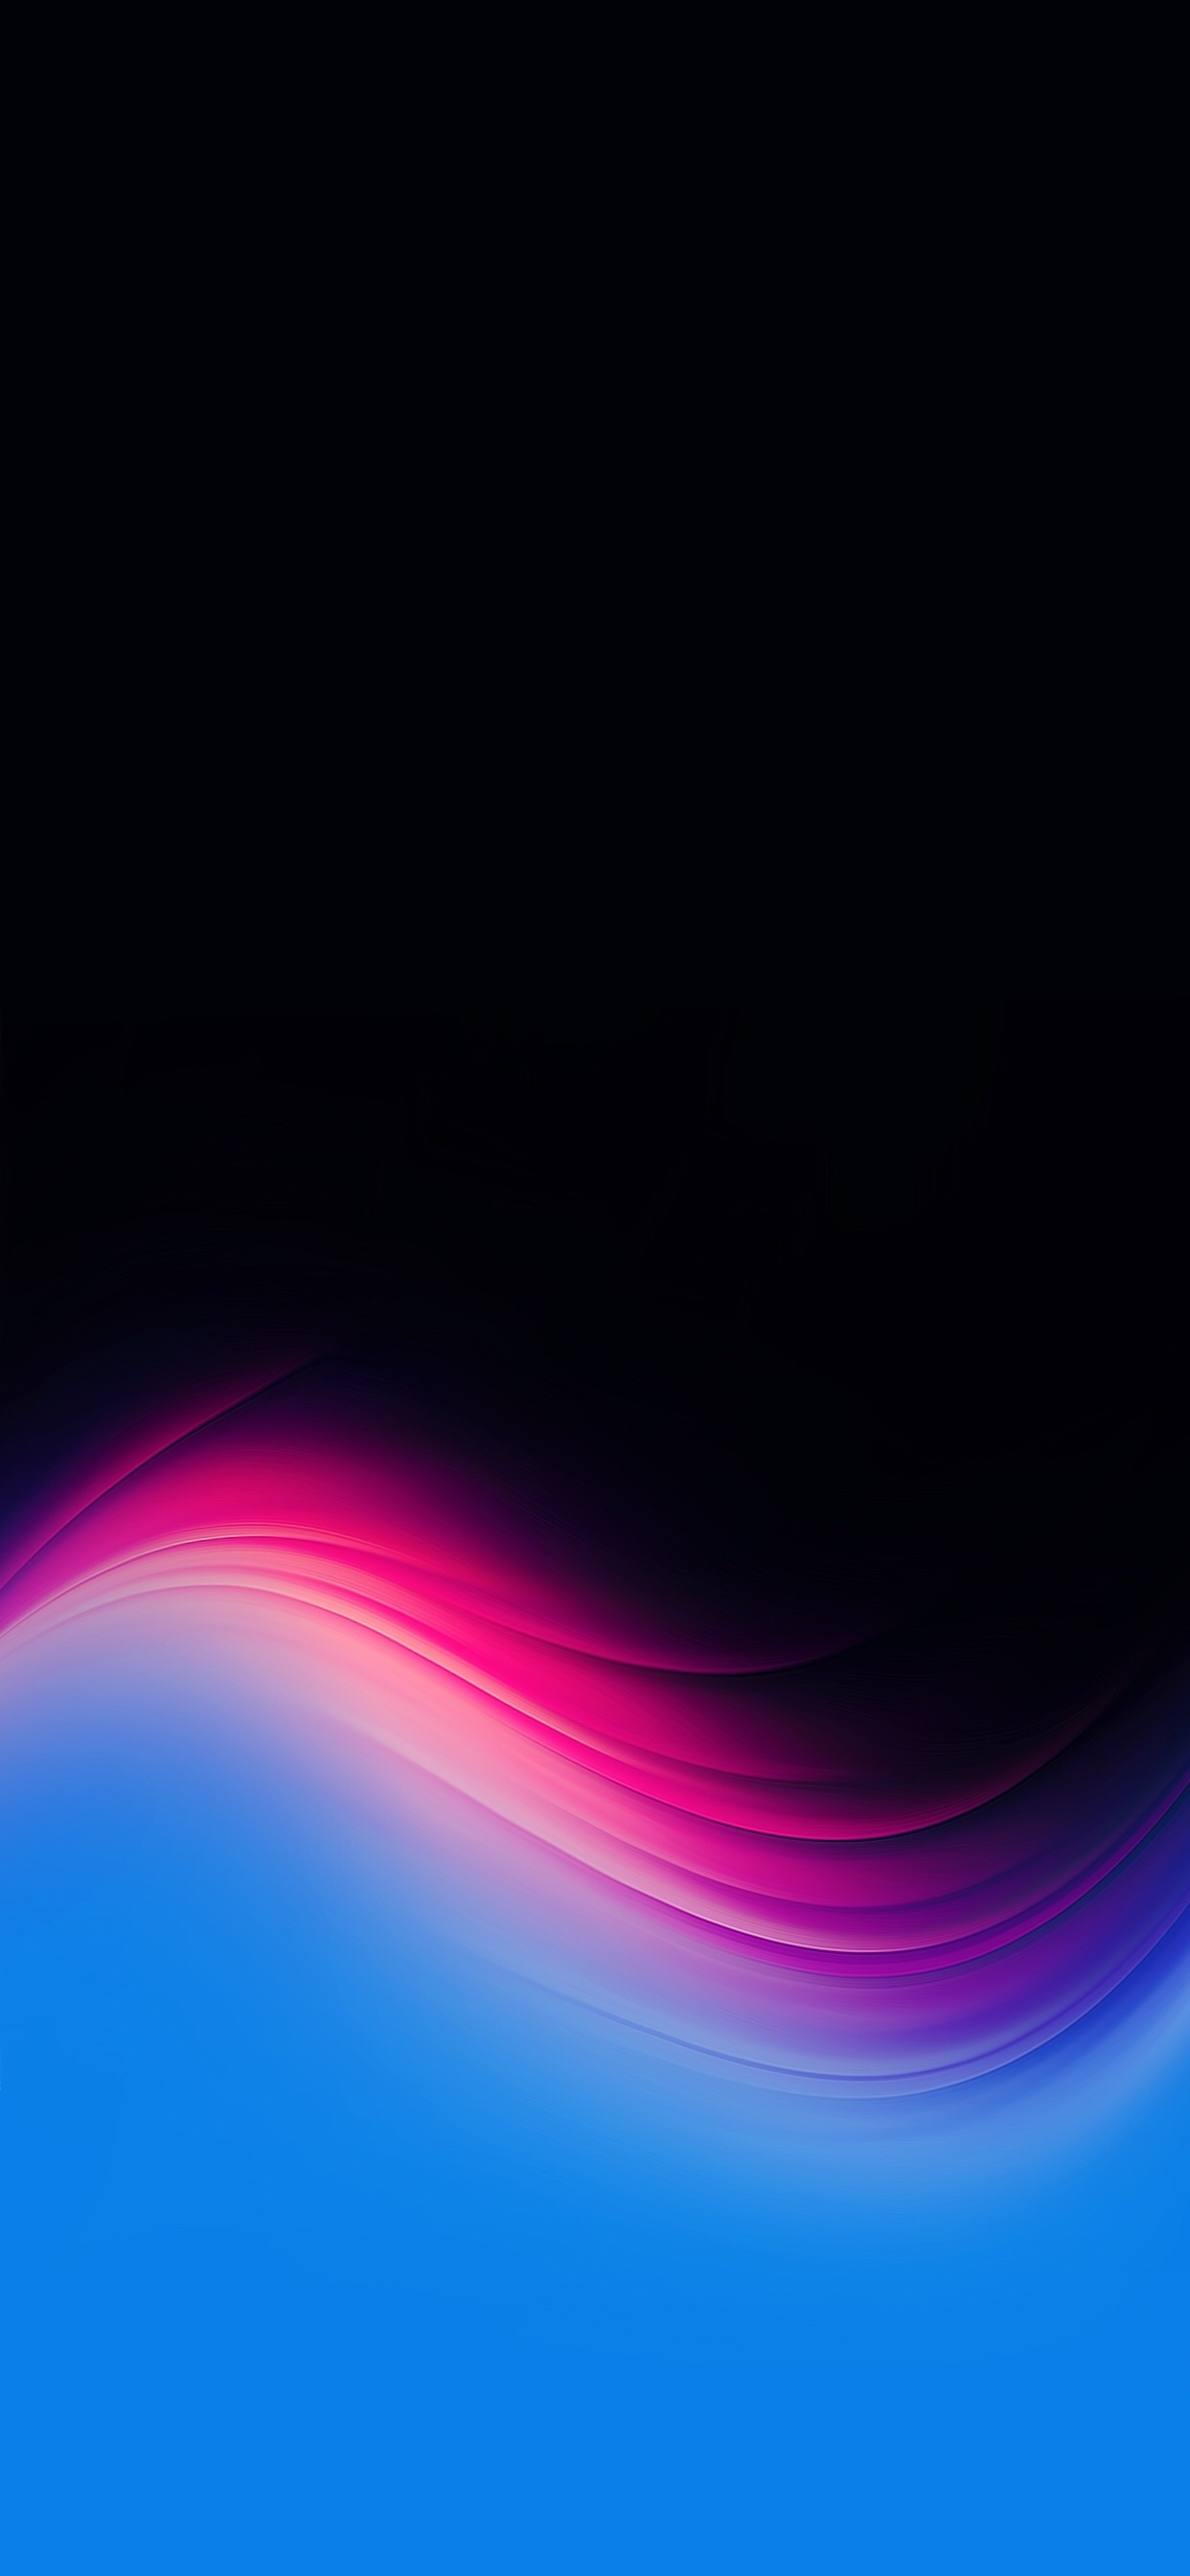 True black with colorful gradients wallpaper